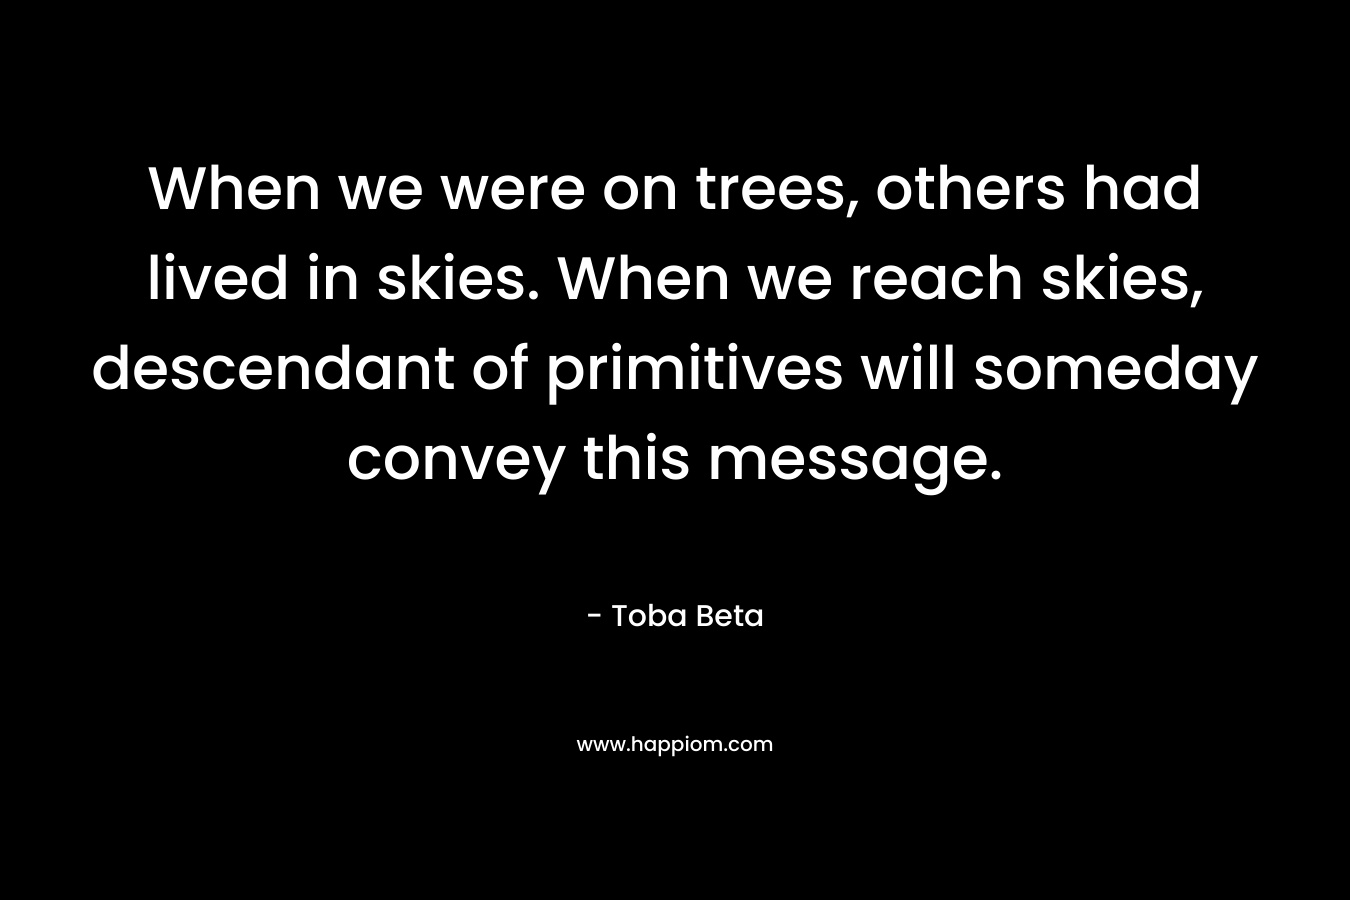 When we were on trees, others had lived in skies. When we reach skies, descendant of primitives will someday convey this message.